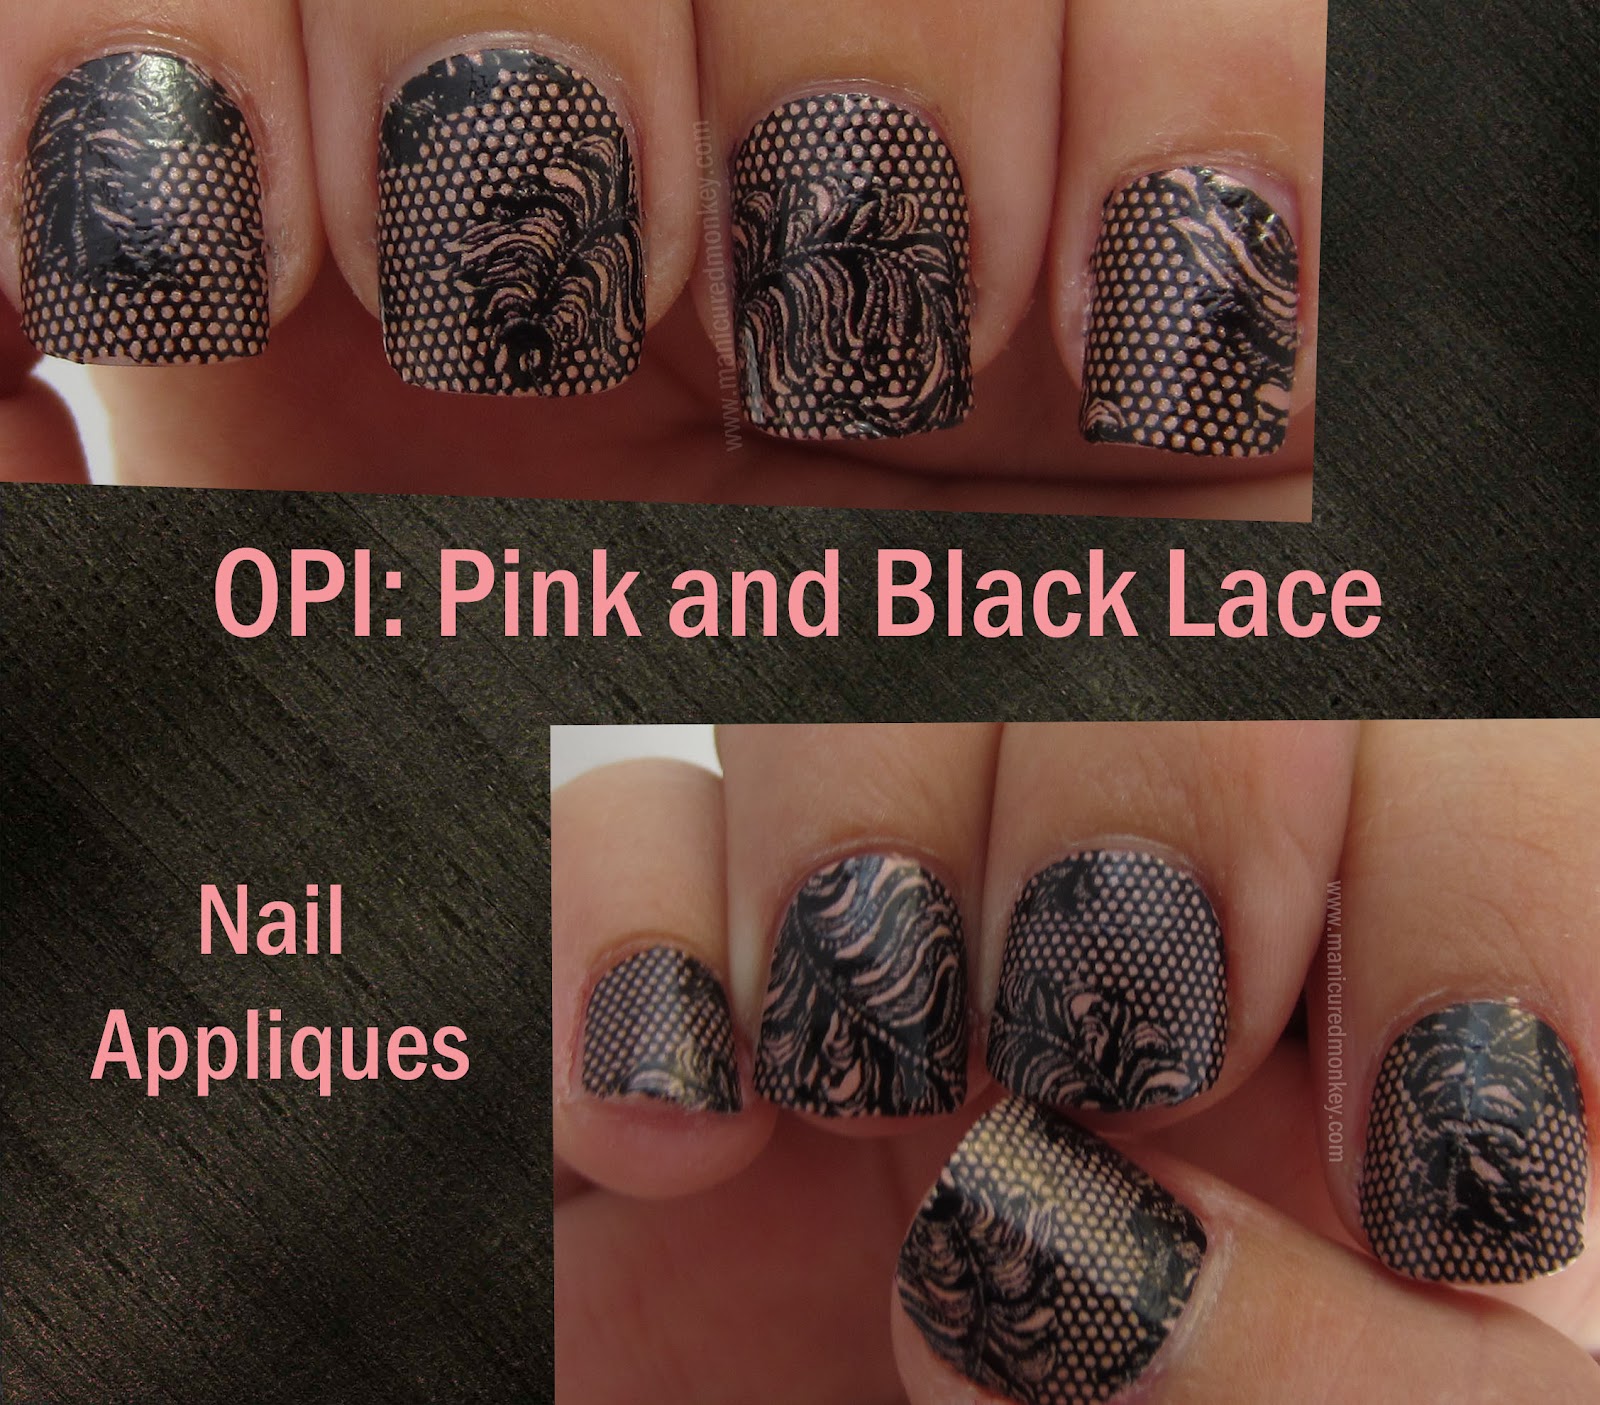 These are the Nail Apps in black lace and they have the ever faintest pink